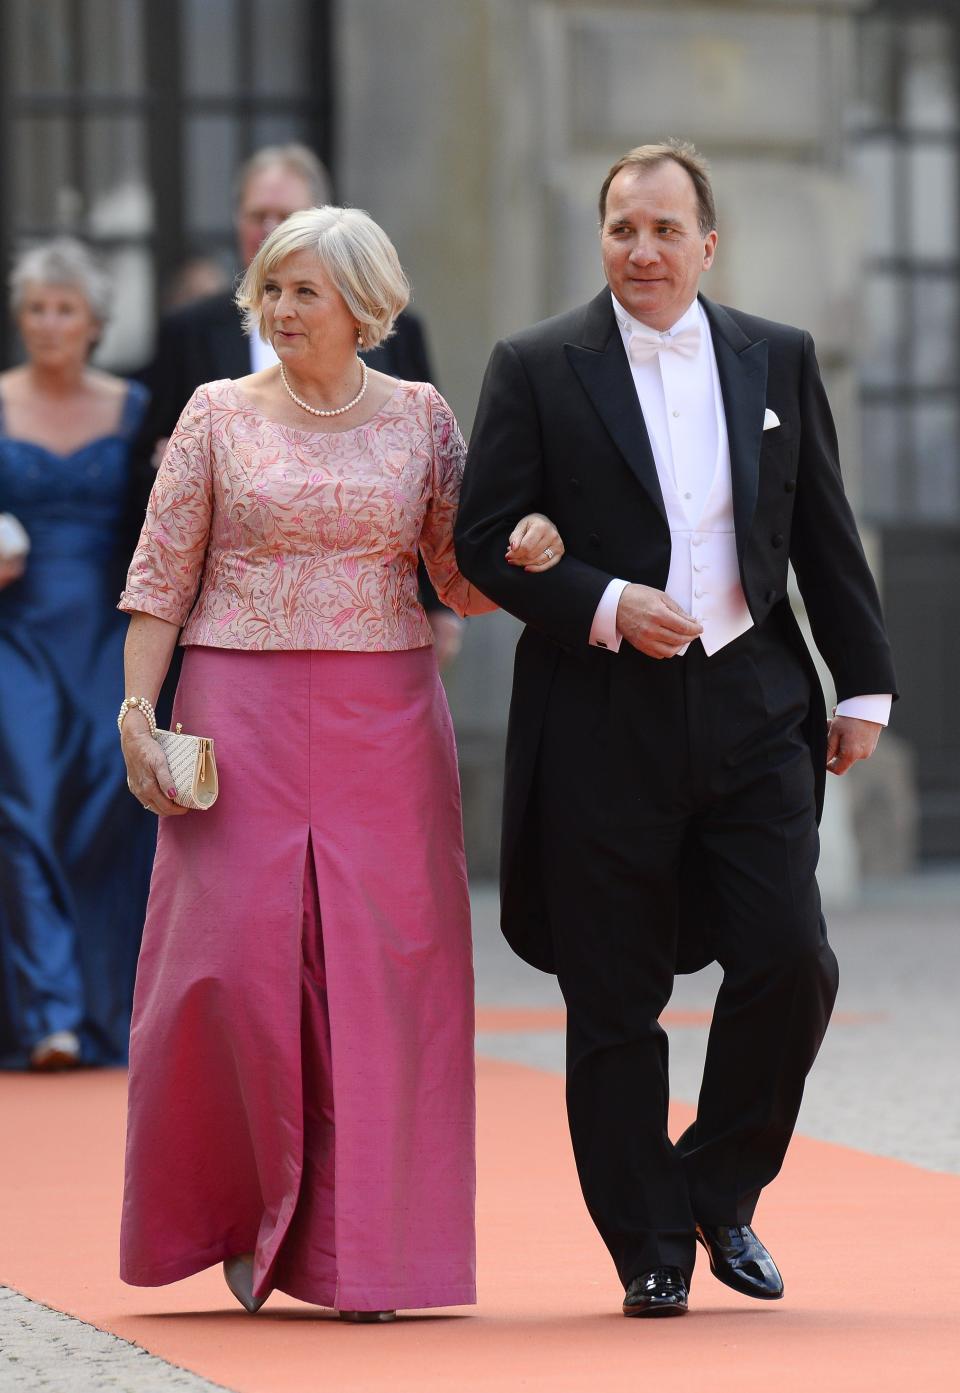 The Swedish prime minister and his wife at Prince Carl Philip and Sofia of Sweden's wedding.